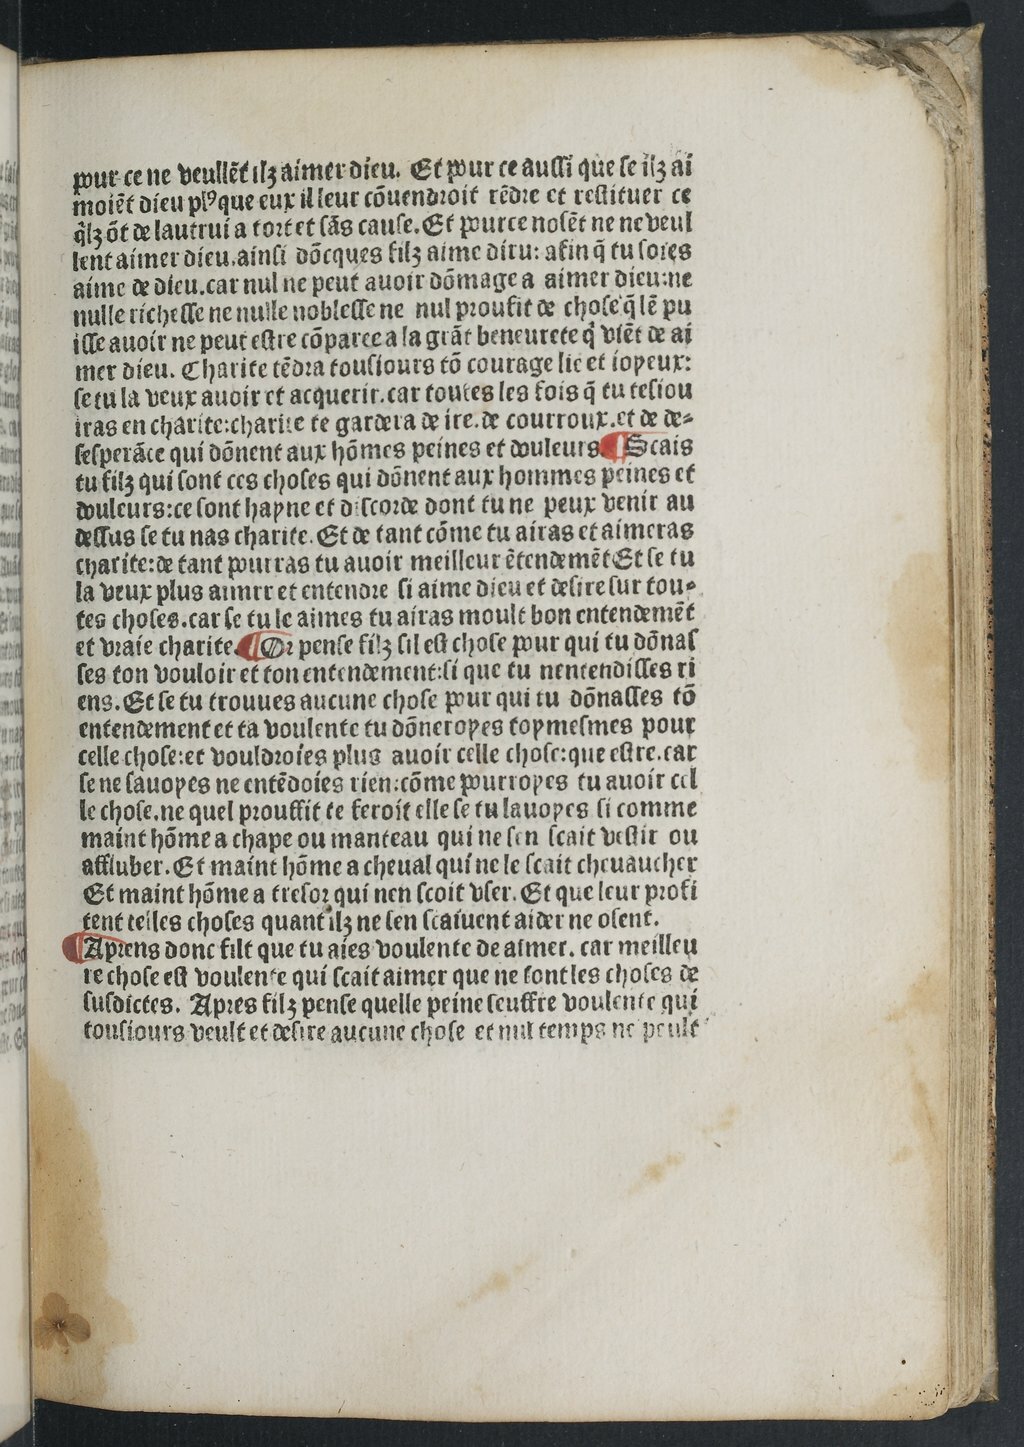 1482 [Antoine Caillaut] Trésor des humains BnF_Page_075.jpg